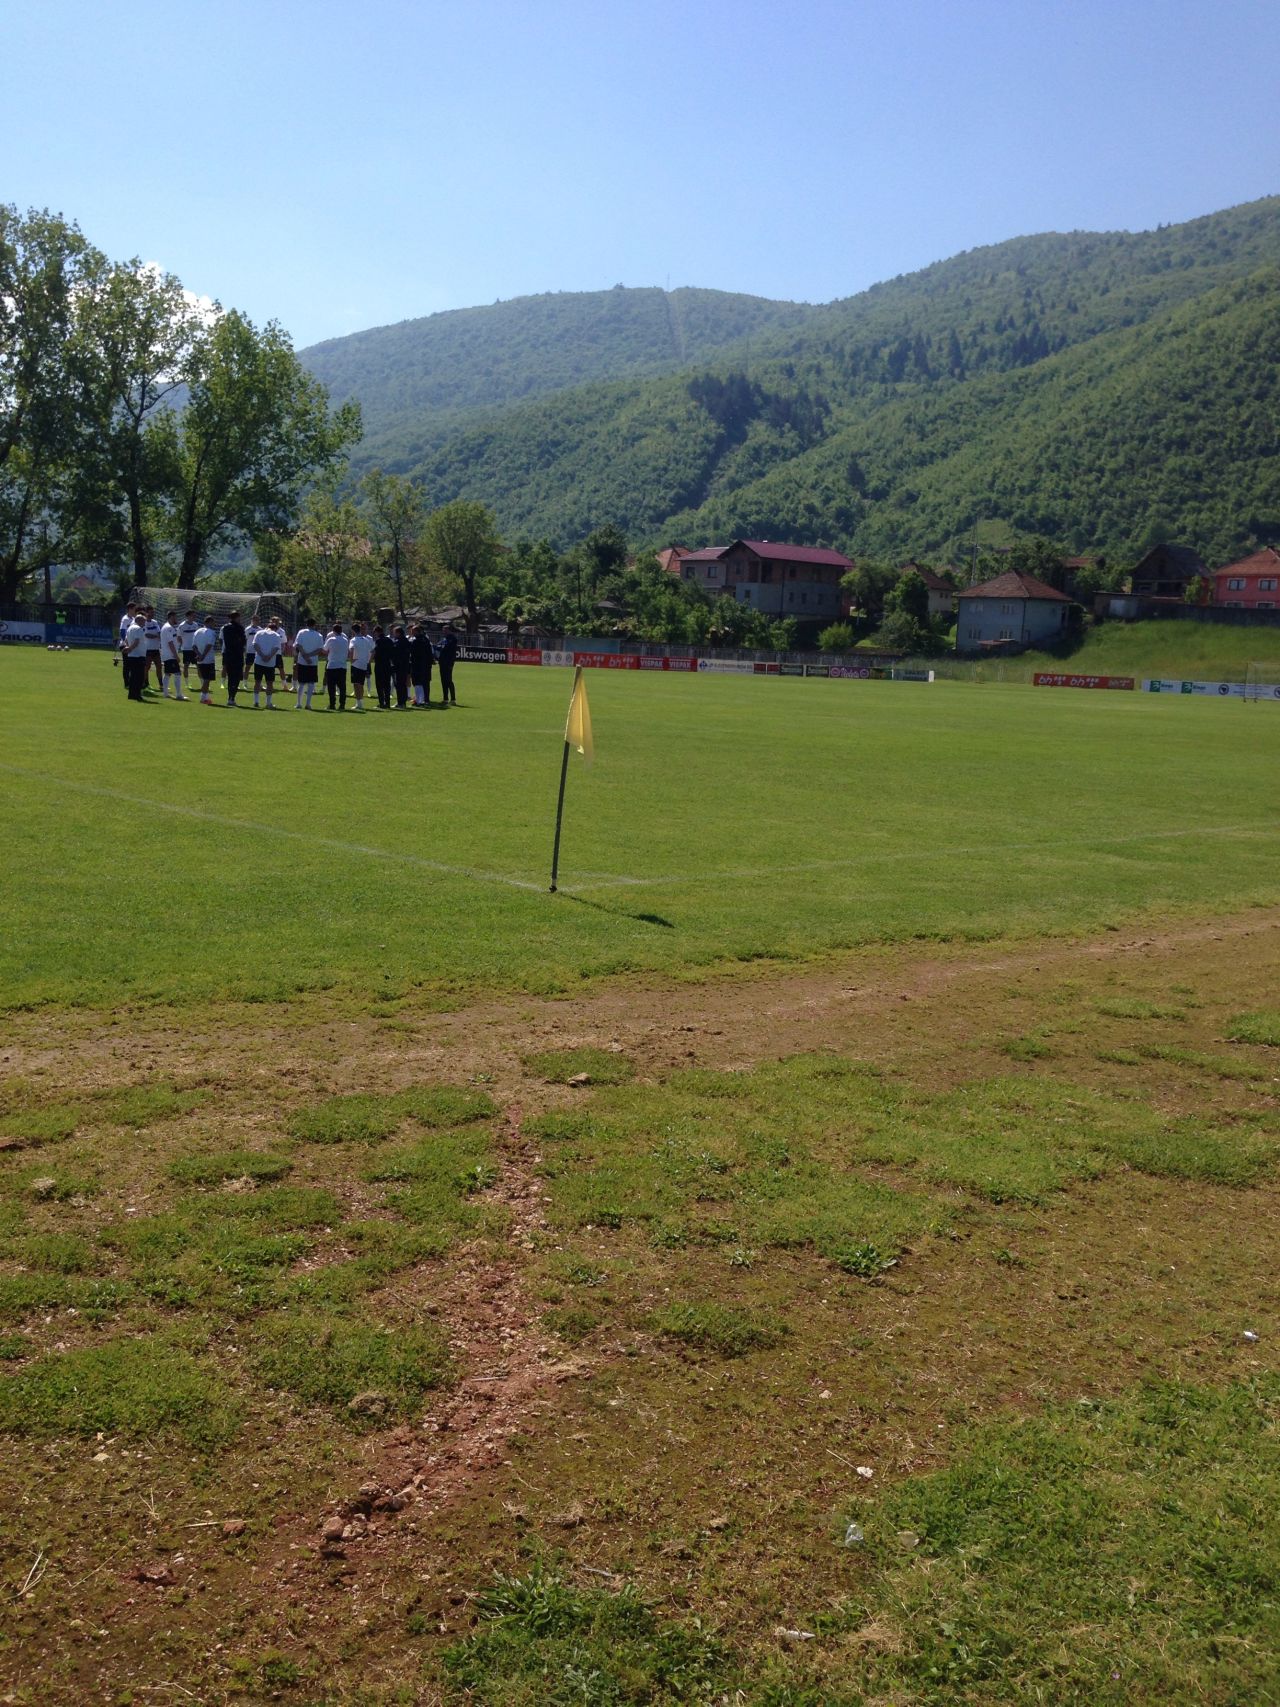 The team's final training camp before departing for the World Cup took place in Ilidza, a picturesque suburb on the outskirts of Sarajevo.